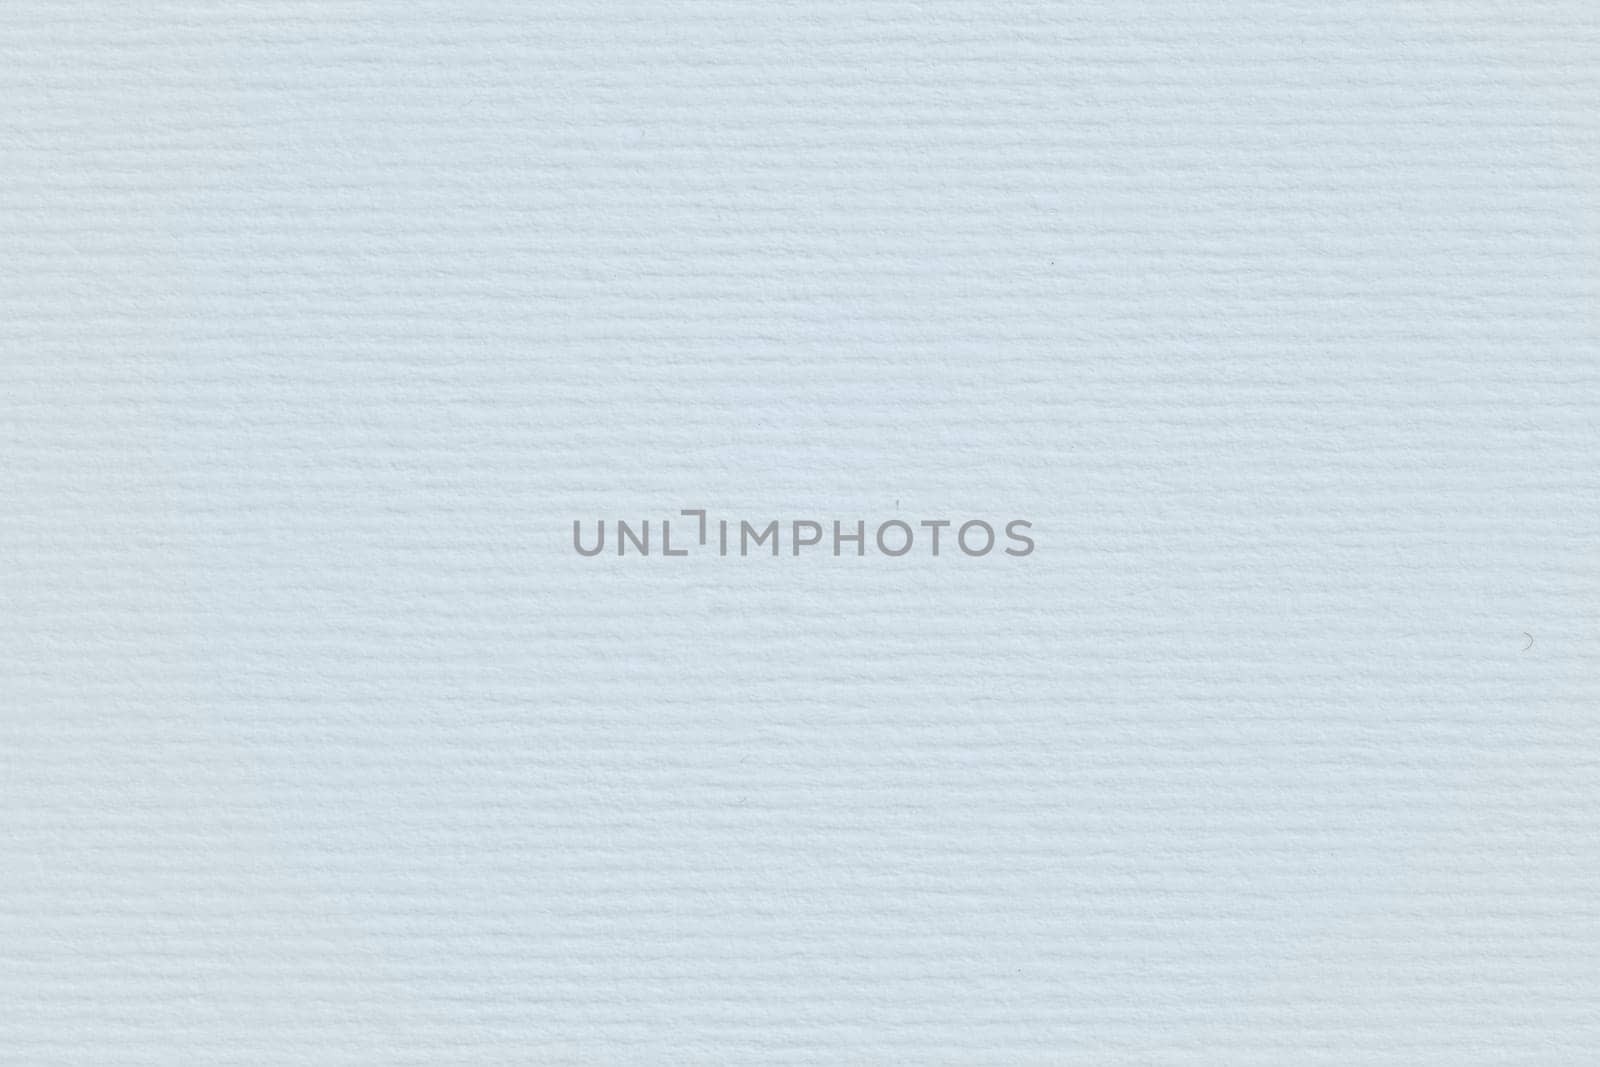 White / light blue structured paper with horizontal lines texture by Ivanko